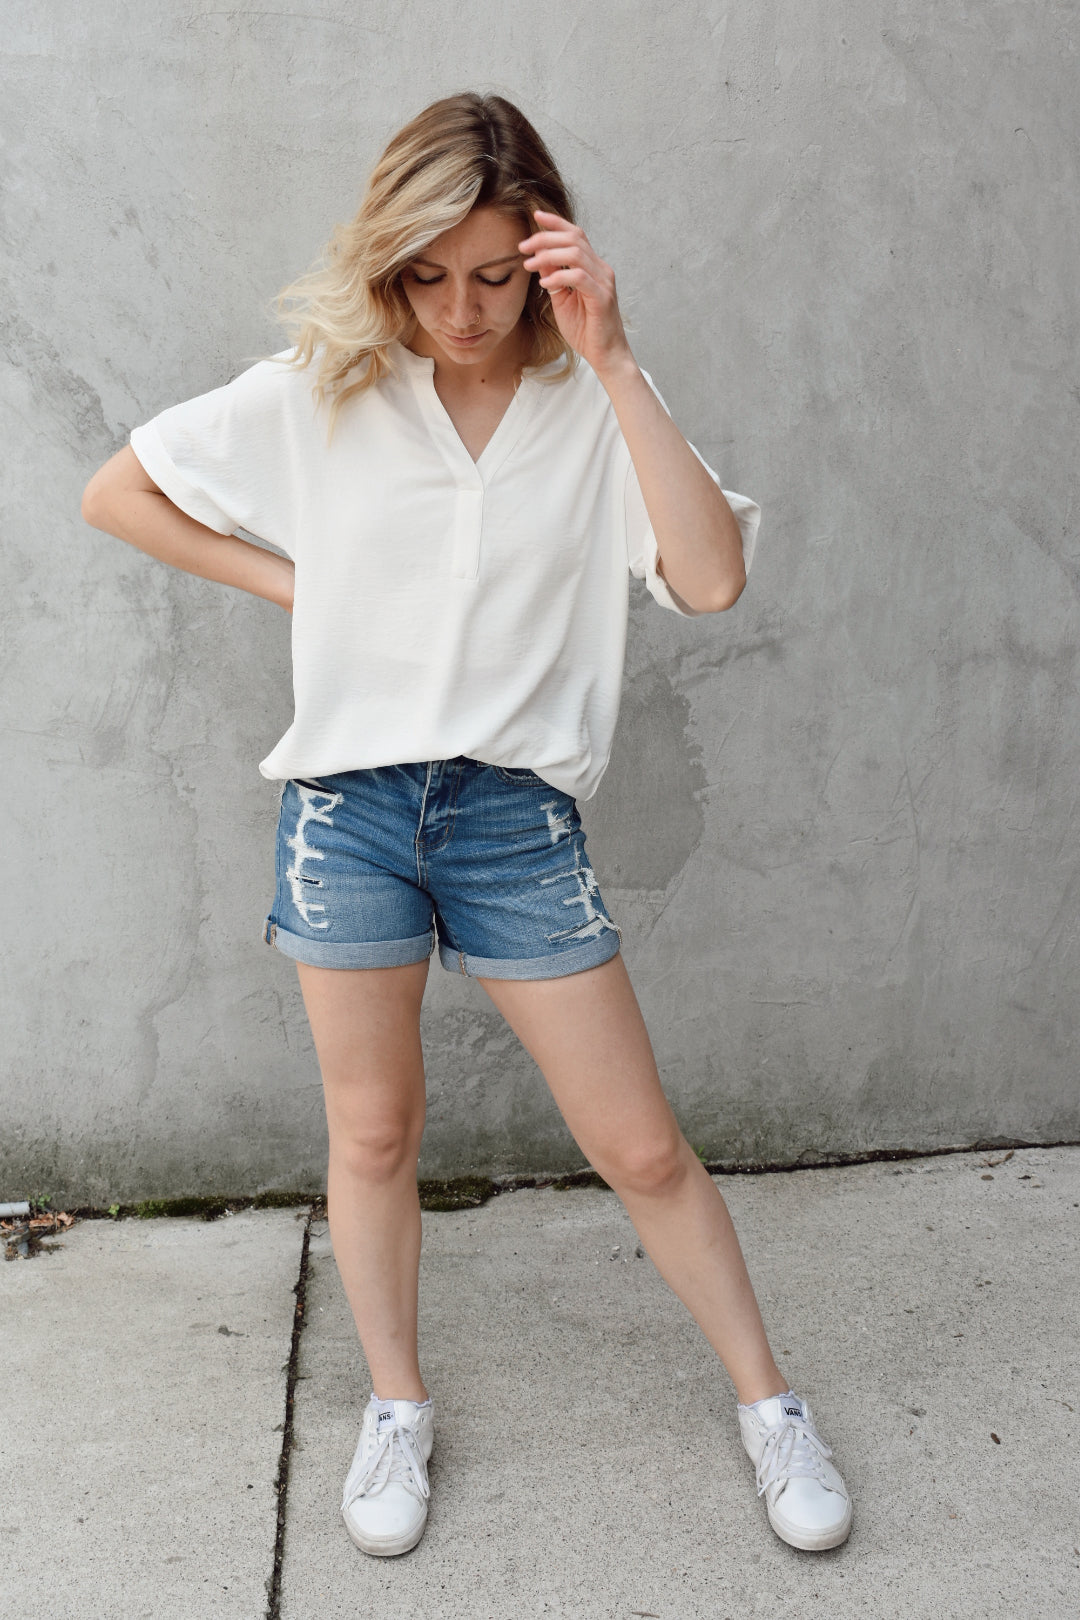 lightweight full length white loose fitted blouse. Has a round neck with a V-neck placket detail front, the dolman short sleeves feature cuff bands. The brand is Mittoshop